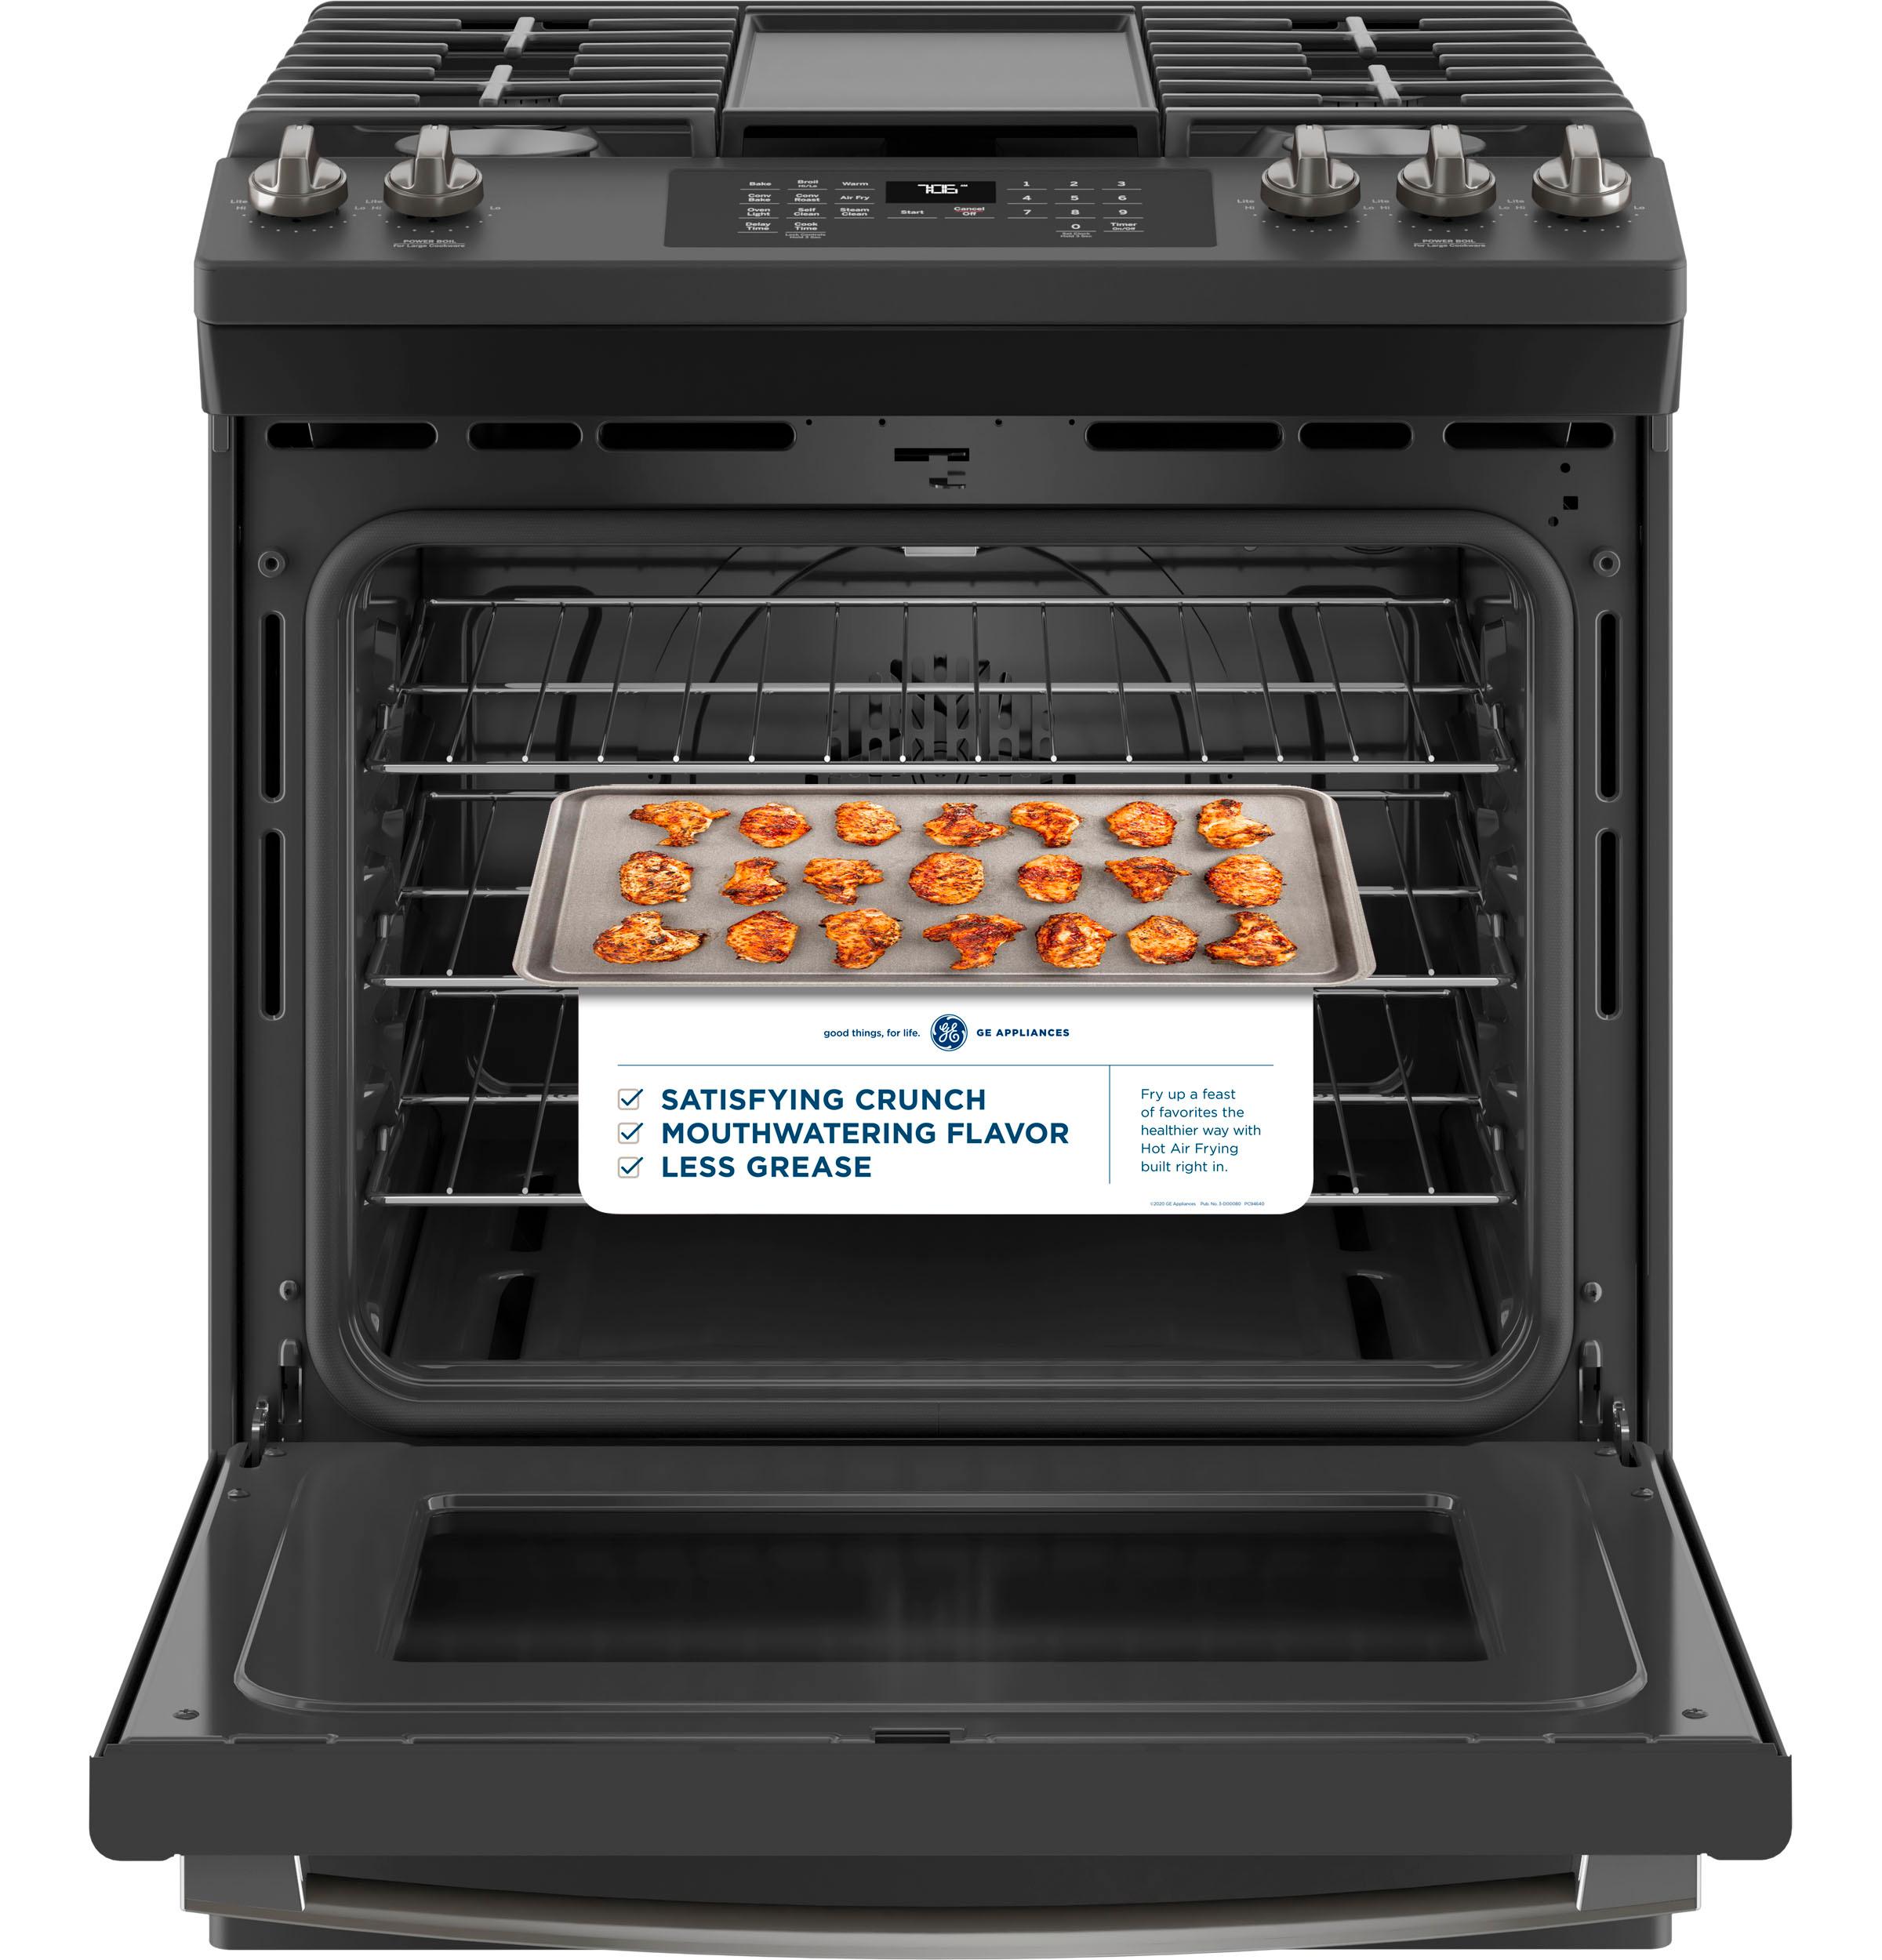 GE® 30" Slide-In Front-Control Convection Gas Range with No Preheat Air Fry